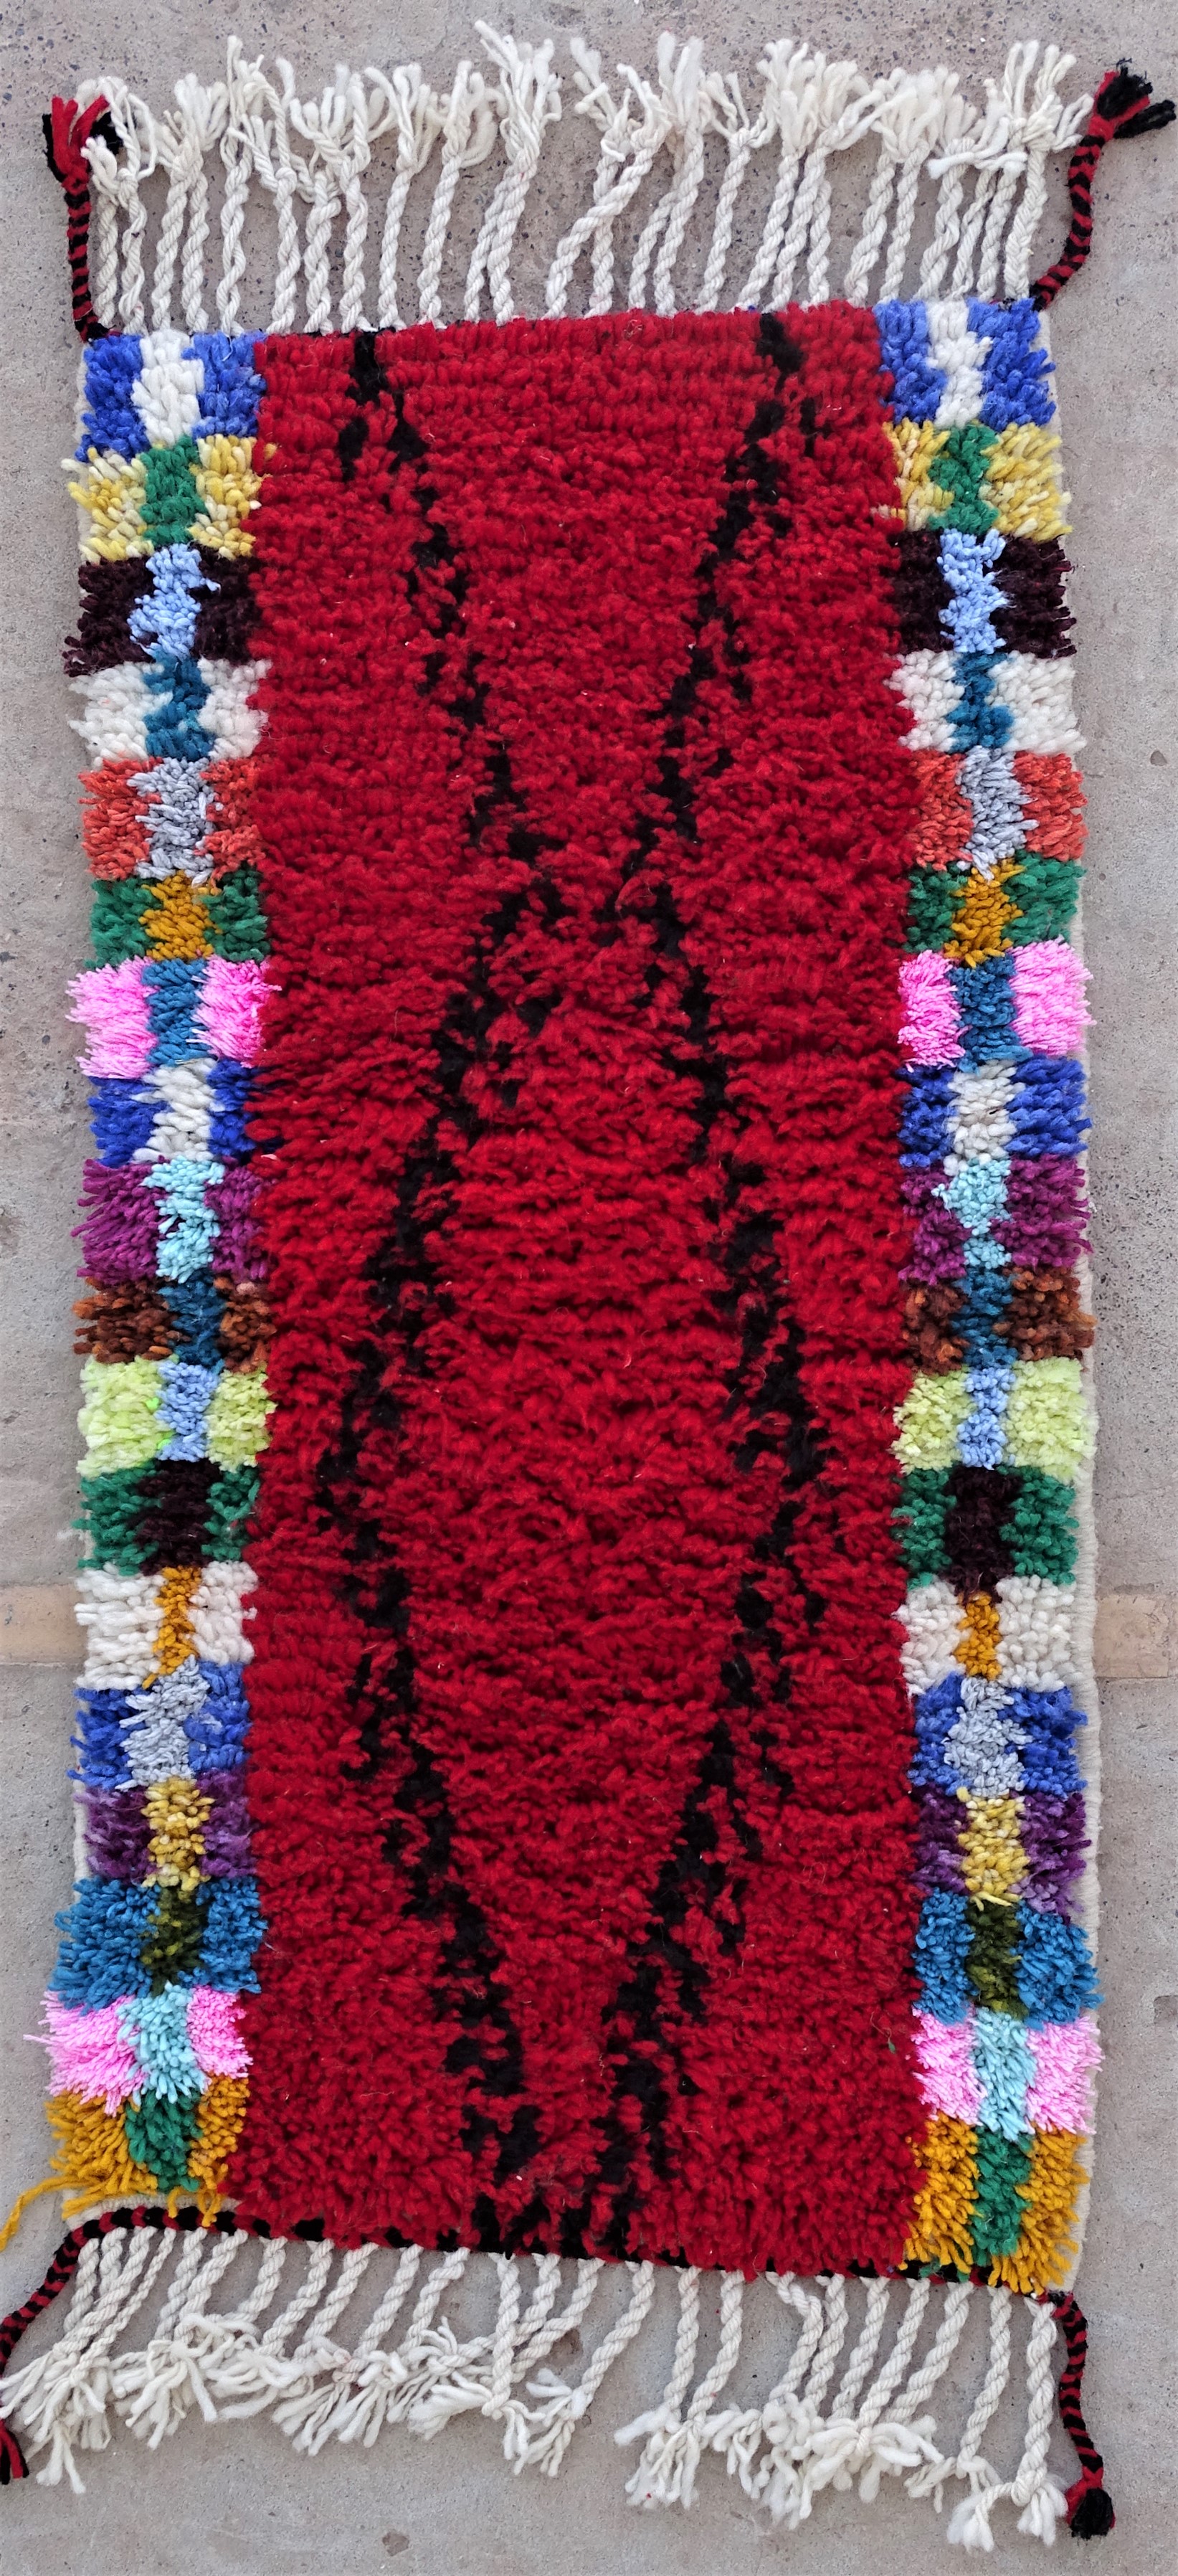 Berber rug #BO53109 type Beni Ourain and Boujaad with colors